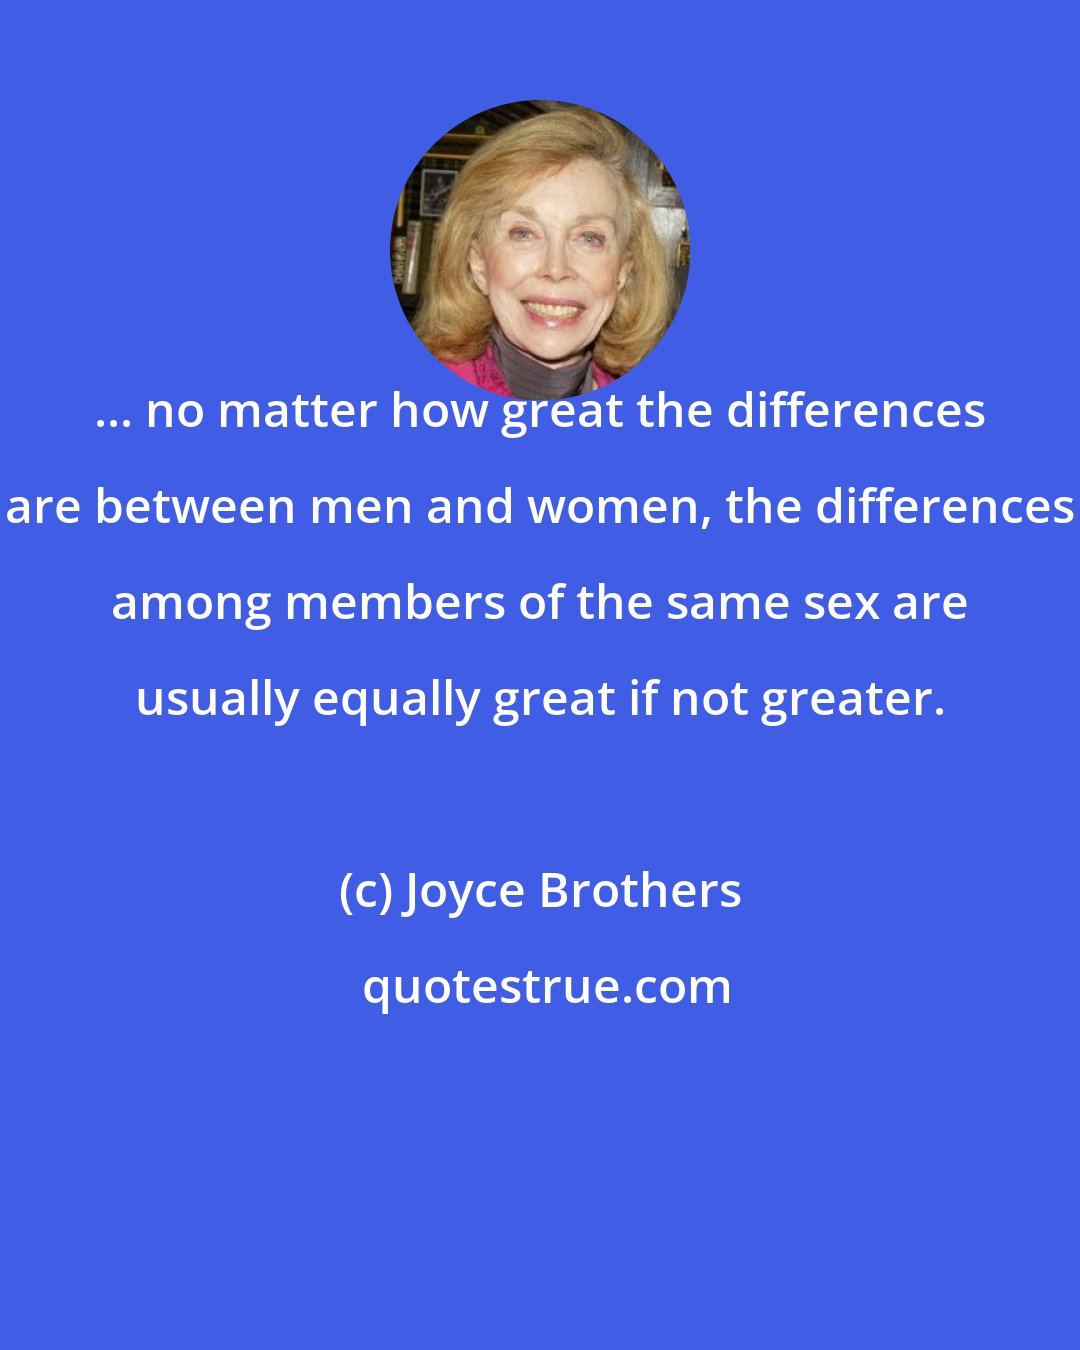 Joyce Brothers: ... no matter how great the differences are between men and women, the differences among members of the same sex are usually equally great if not greater.